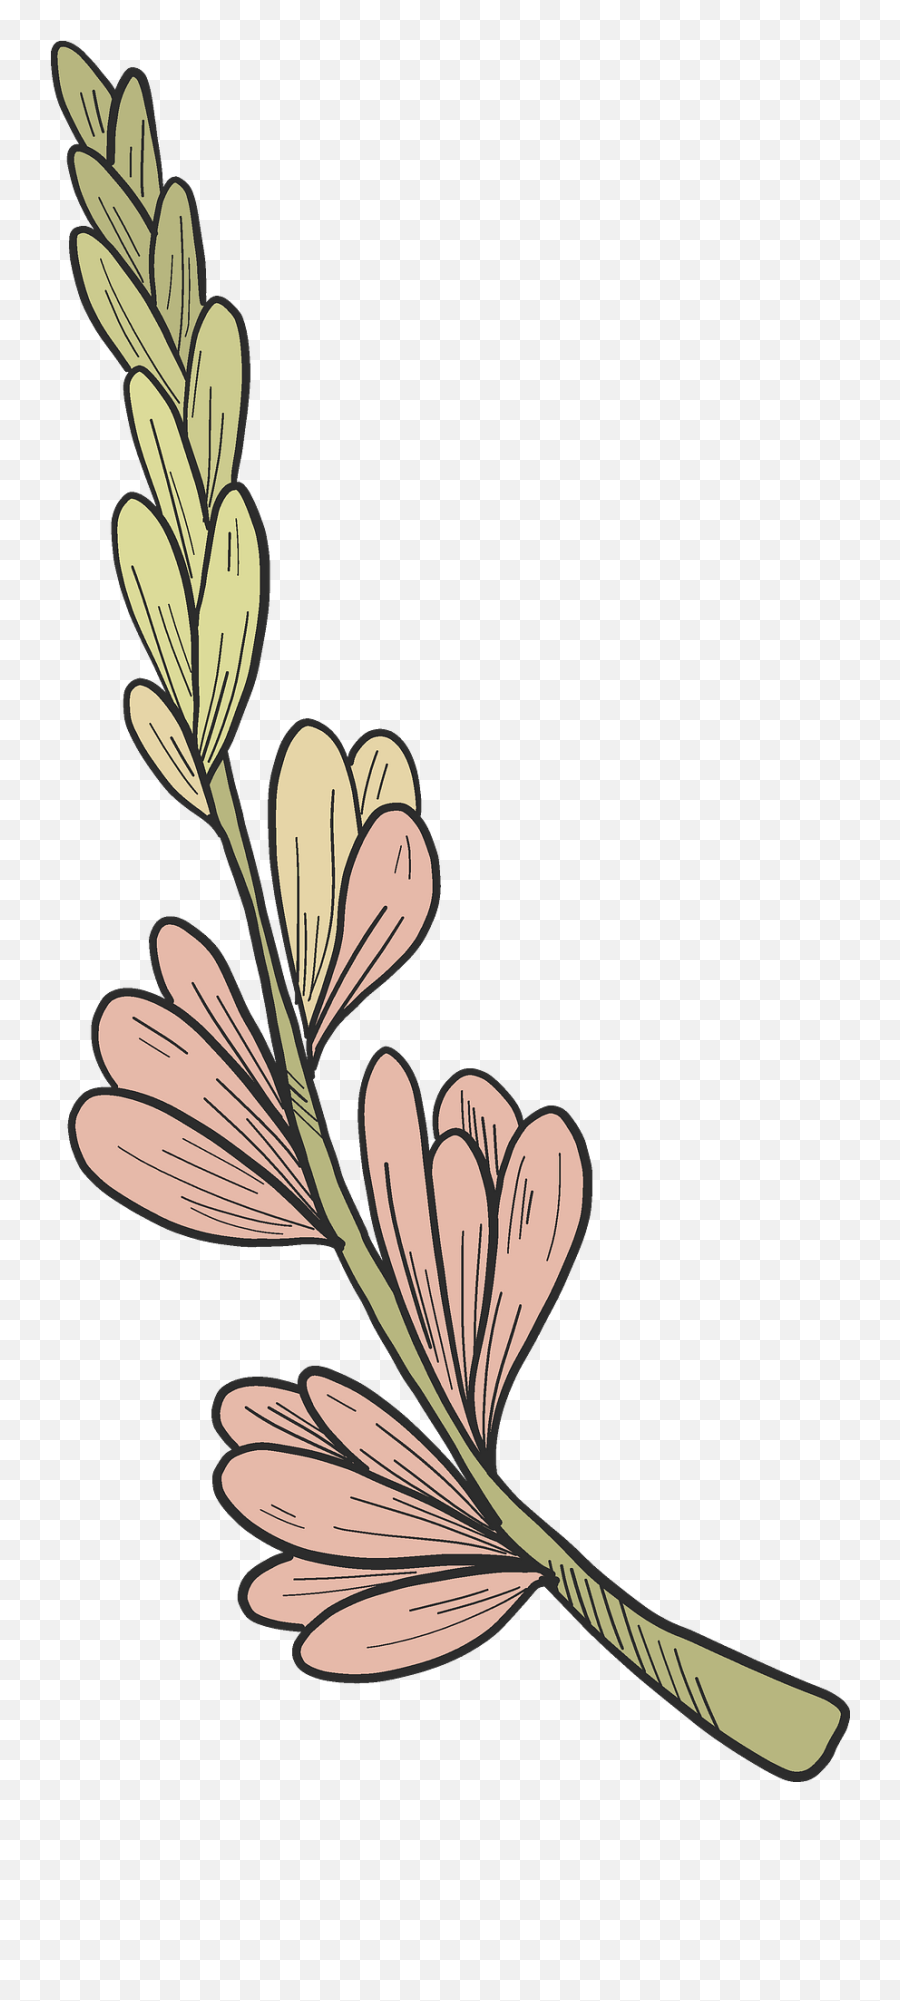 Spring Flowers Clipart - Twig Emoji,Spring Flowers Clipart